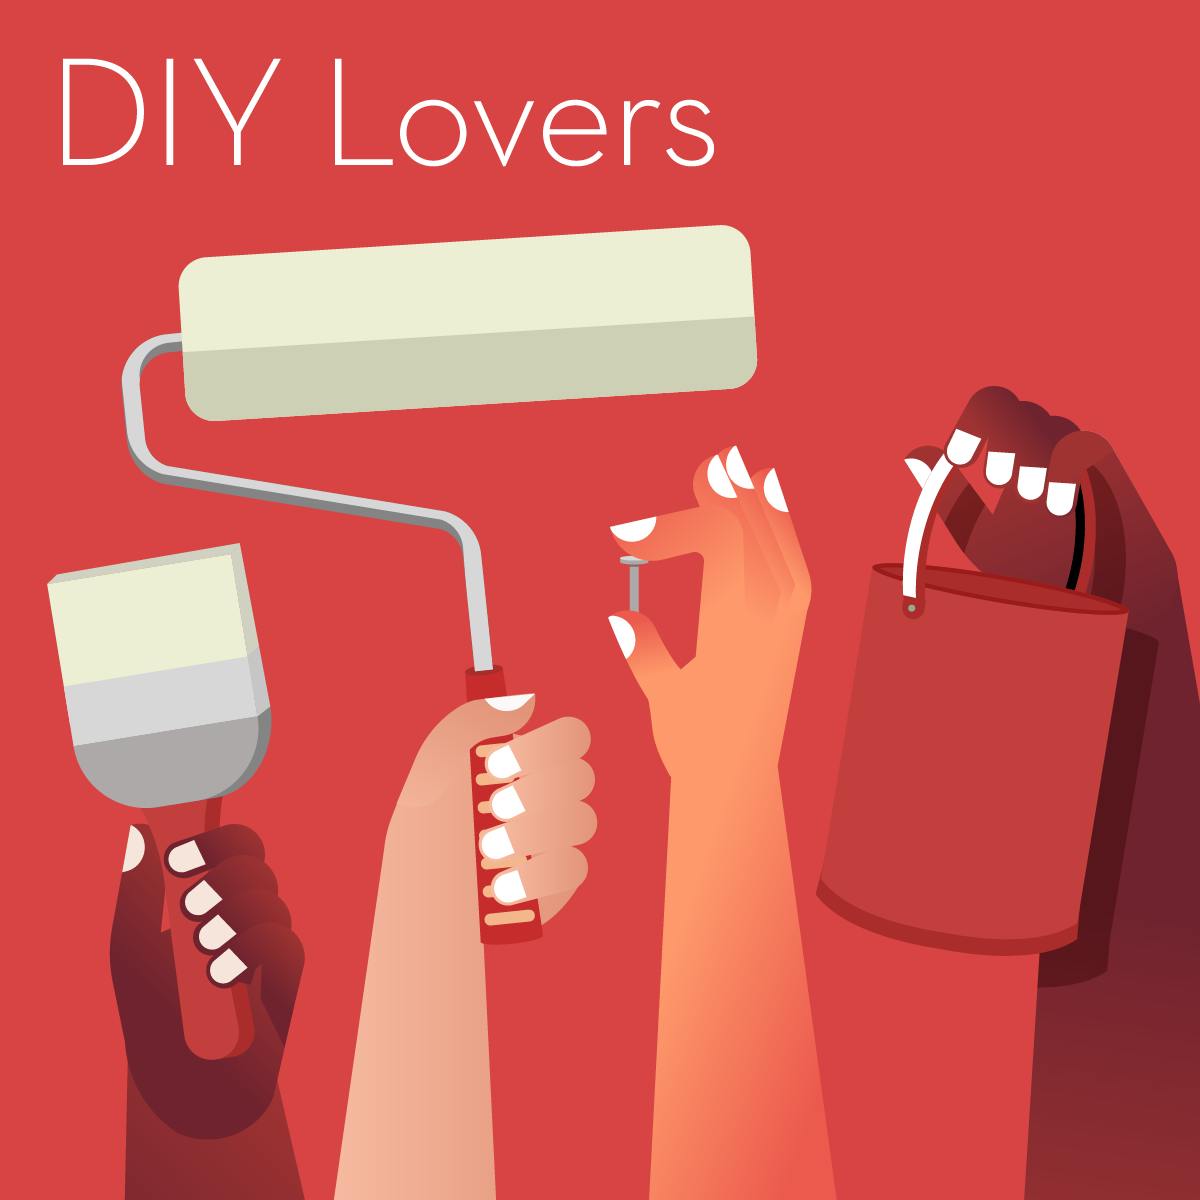 Illustration of a gift guide for DIY Lovers, showing hands holding a paint roller, paint can and paintbrush.